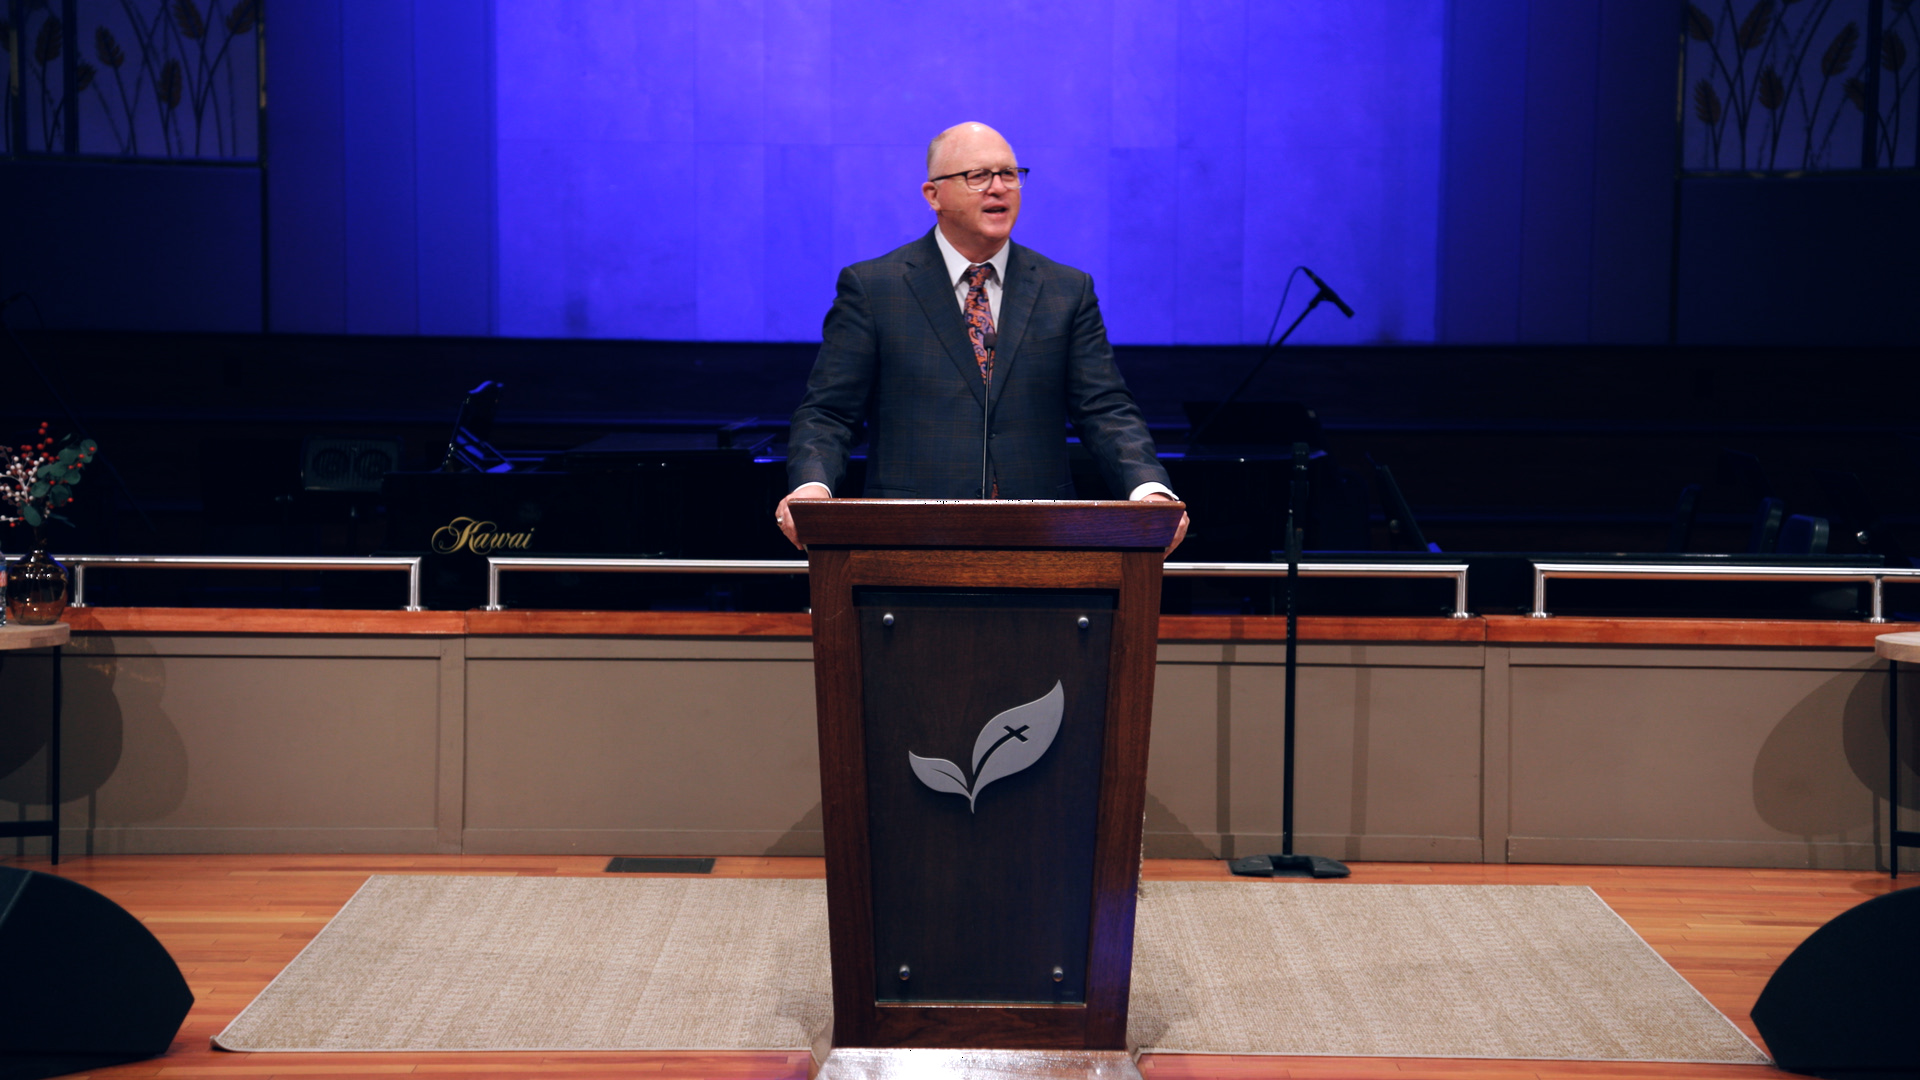 Pastor Paul Chappell: Courageous